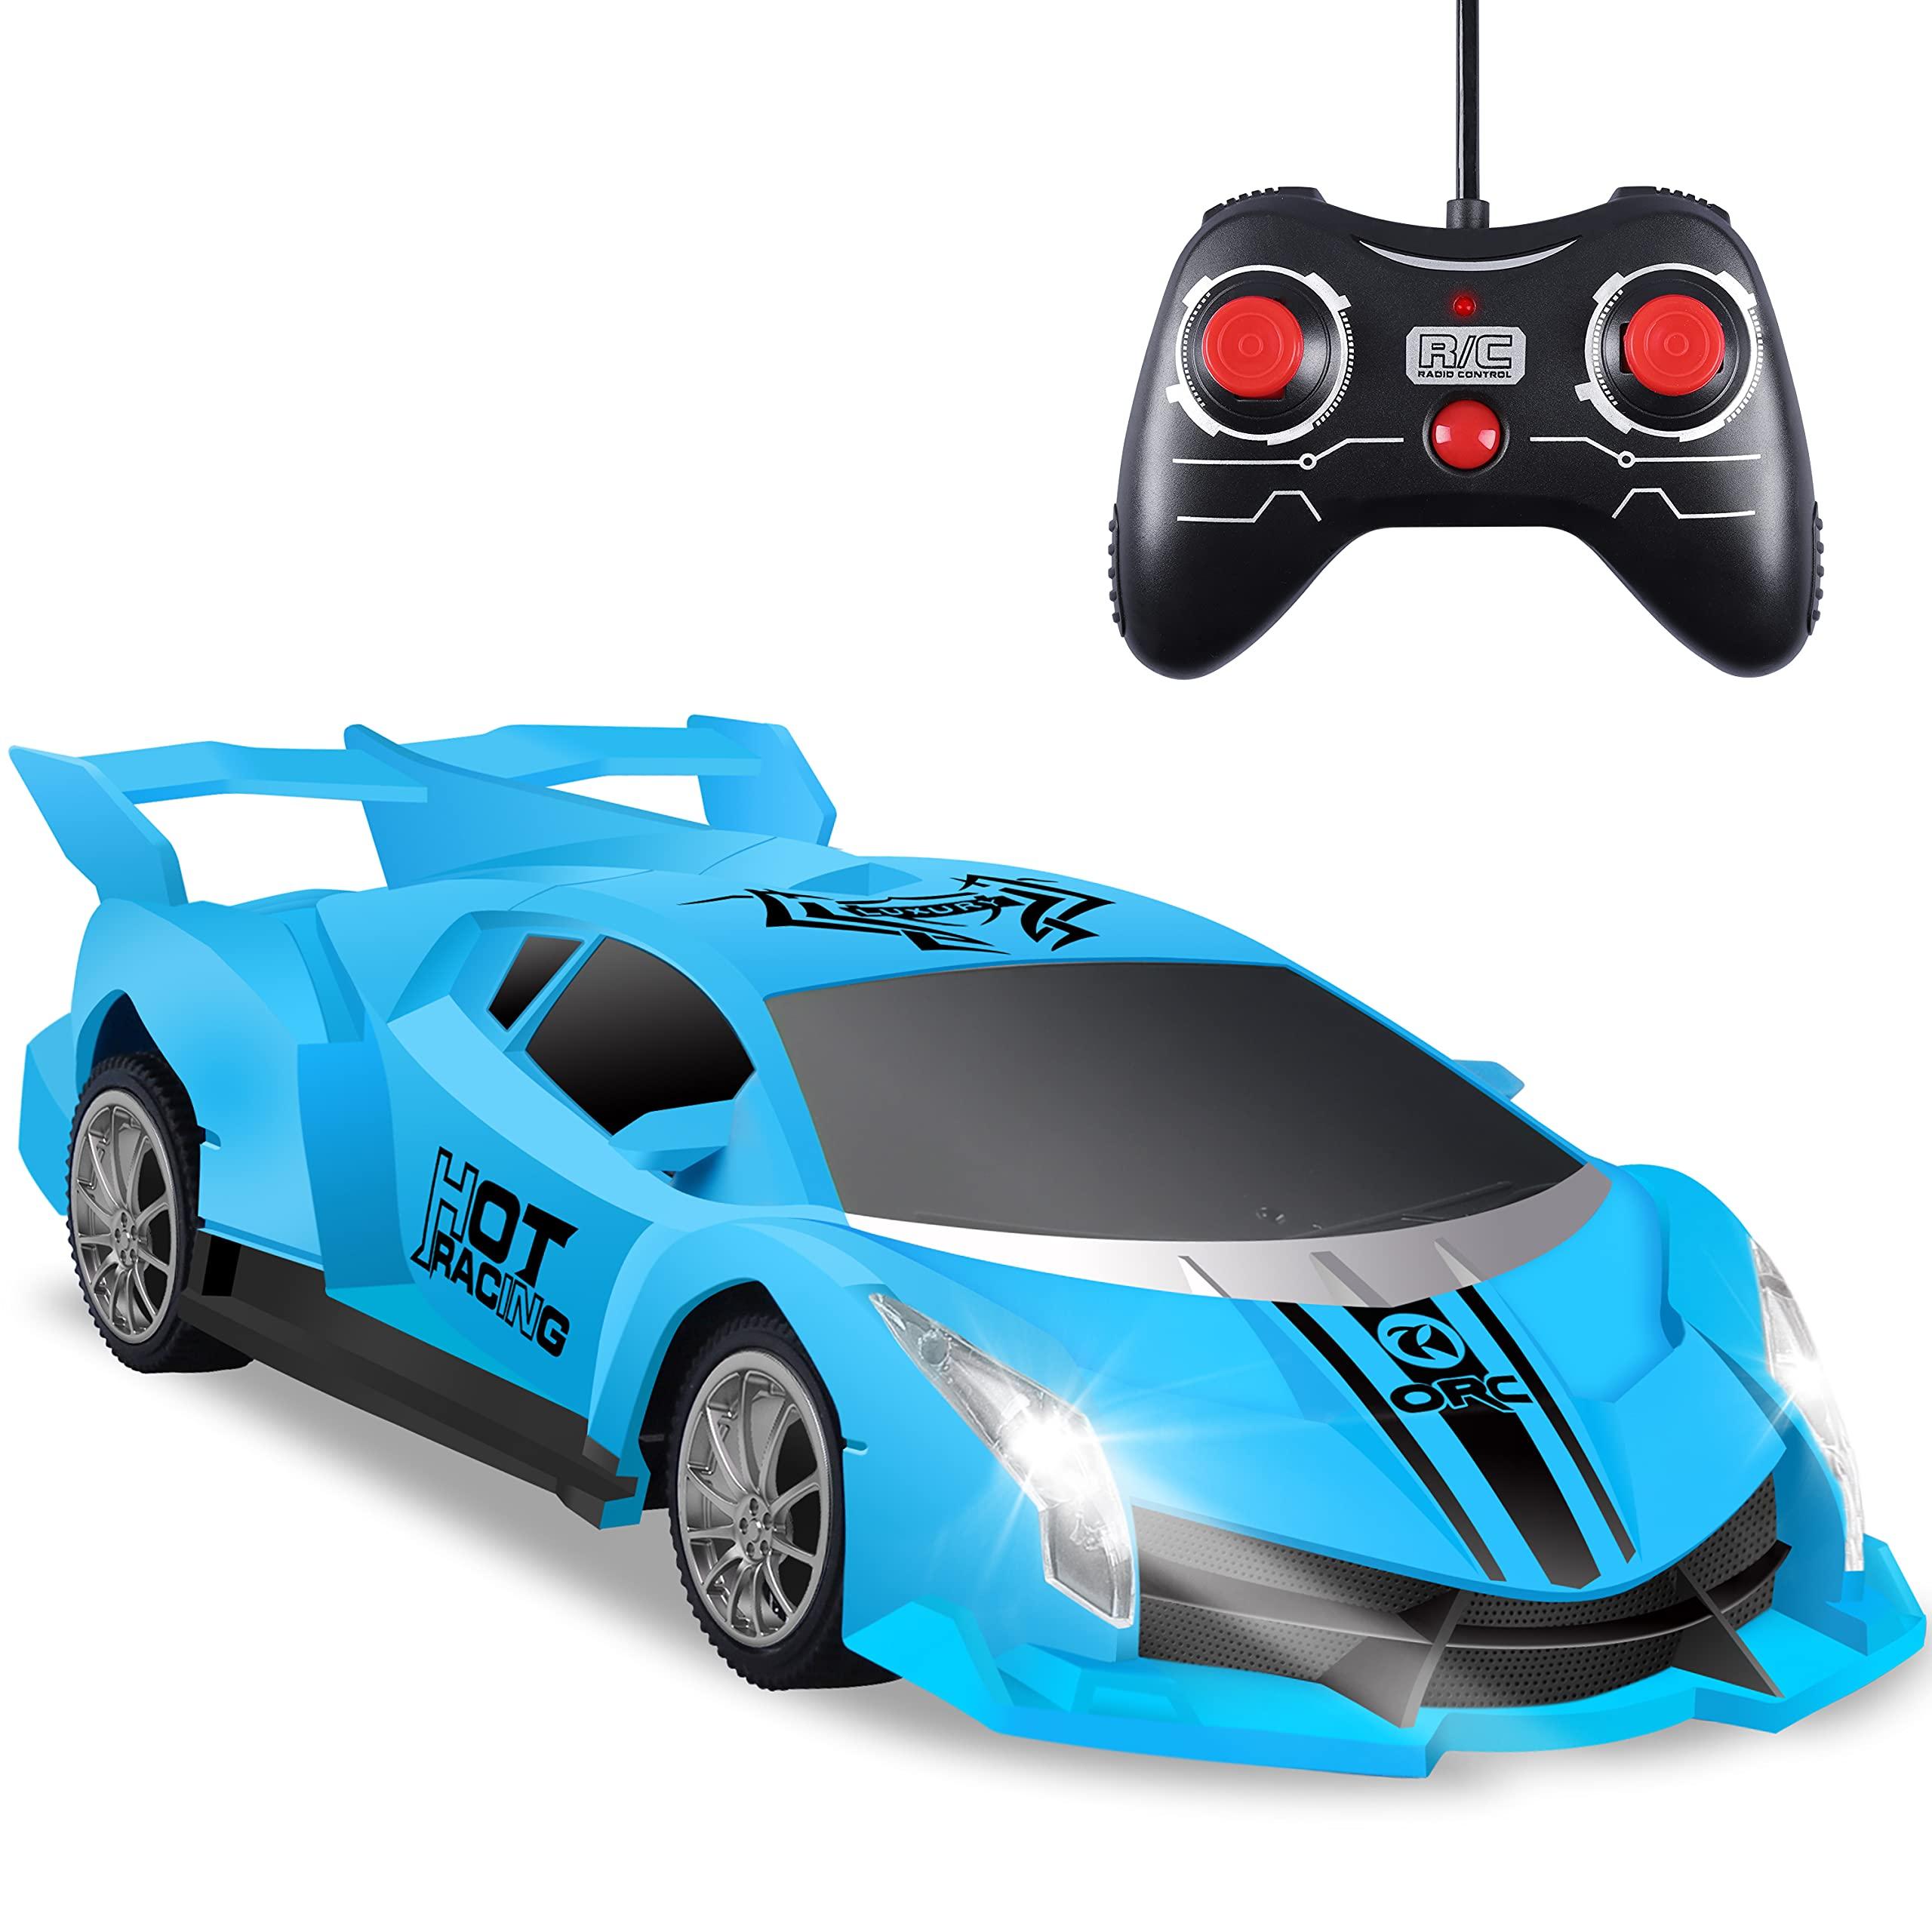 Remote Car Toys Amazon: Top Remote Car Toy Brands on Amazon and Their Notable Products